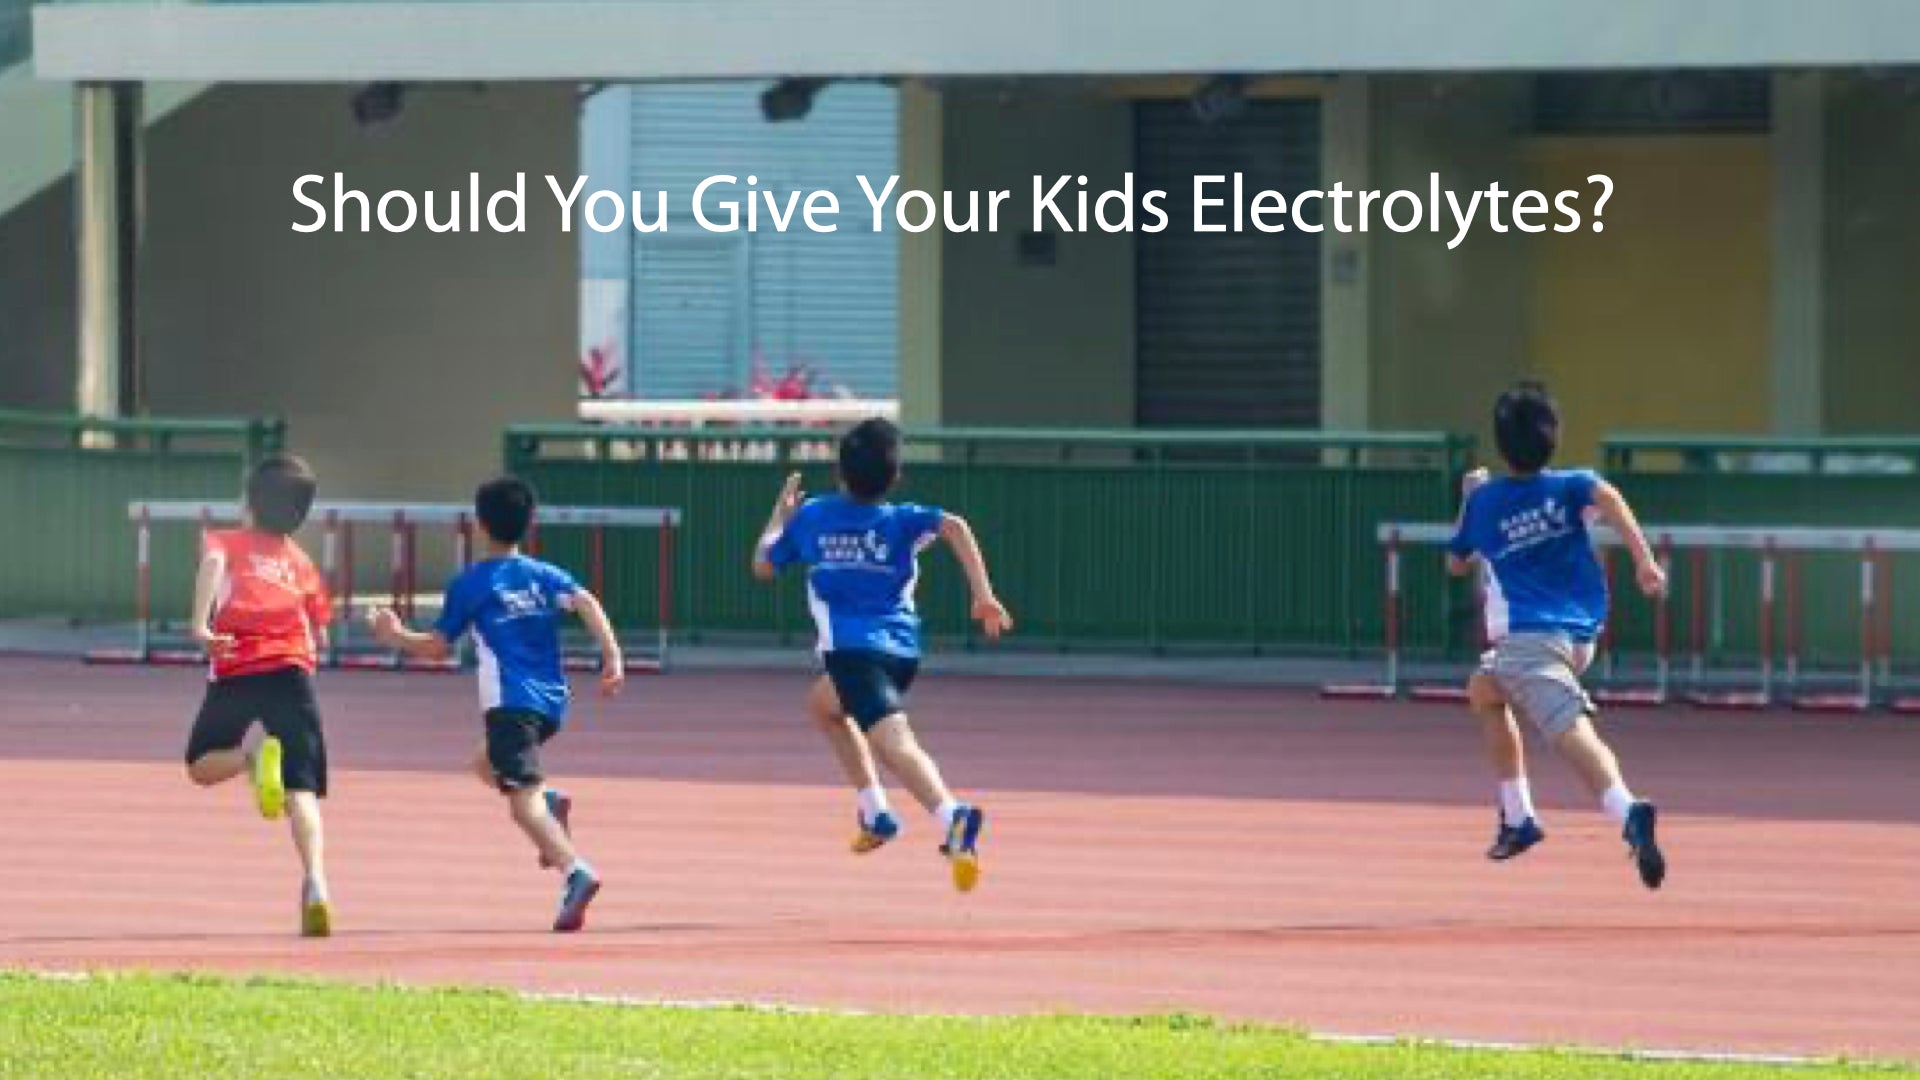 Should You Give Your Kids Electrolytes?